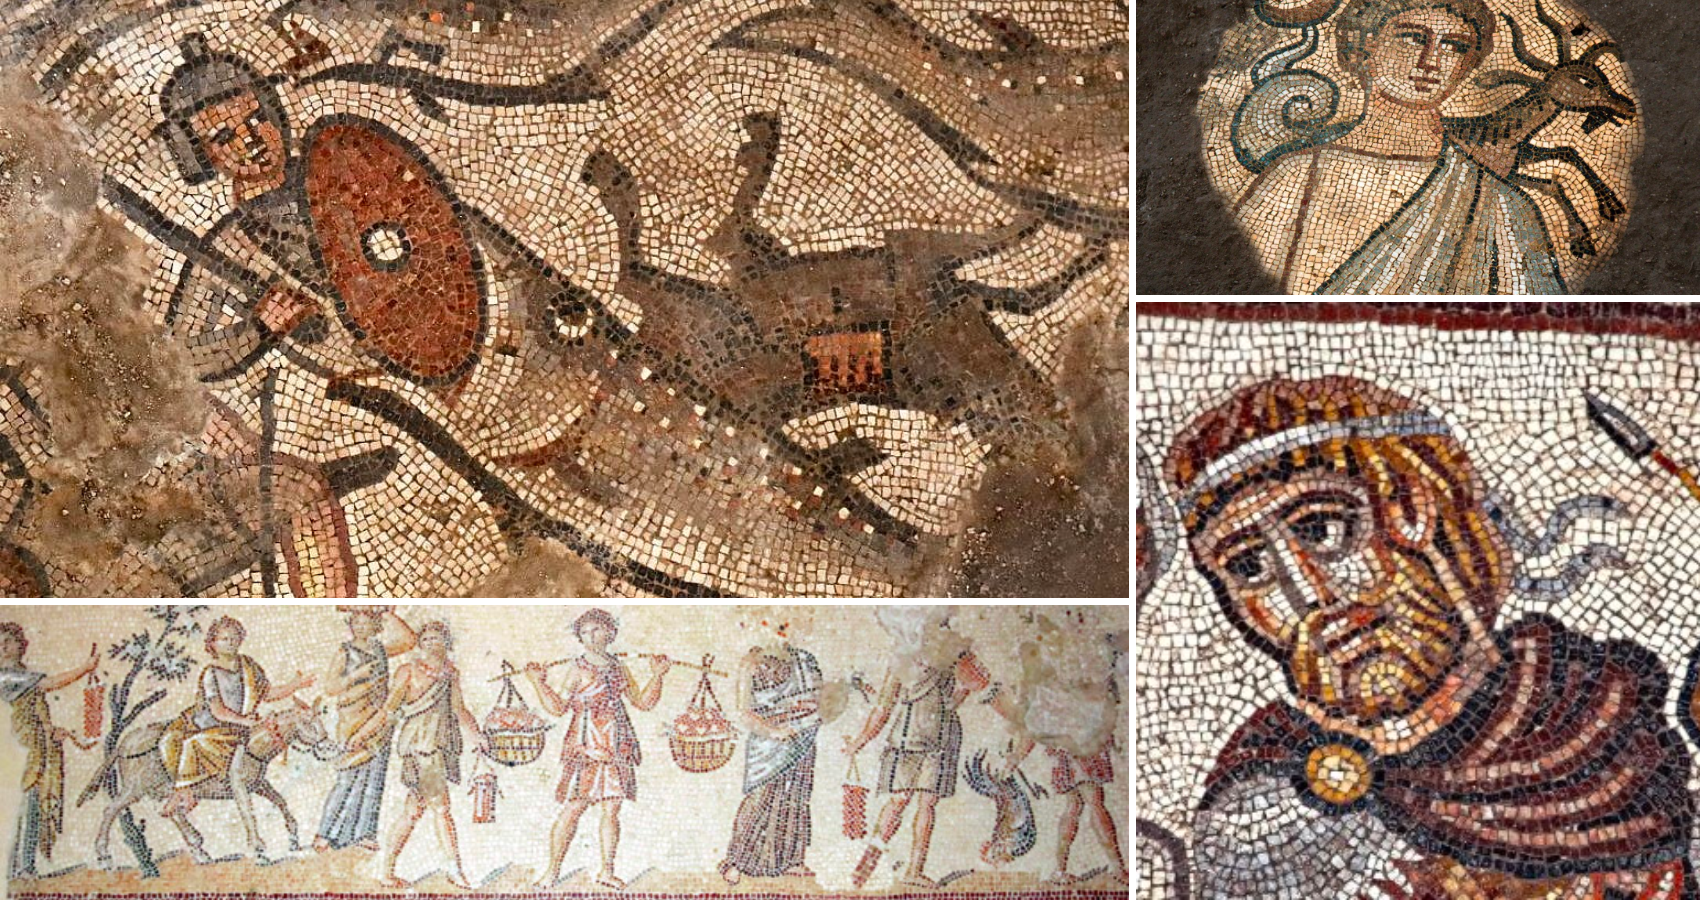 Stunning biblical ‘spies’ mosaic discovered in Israel